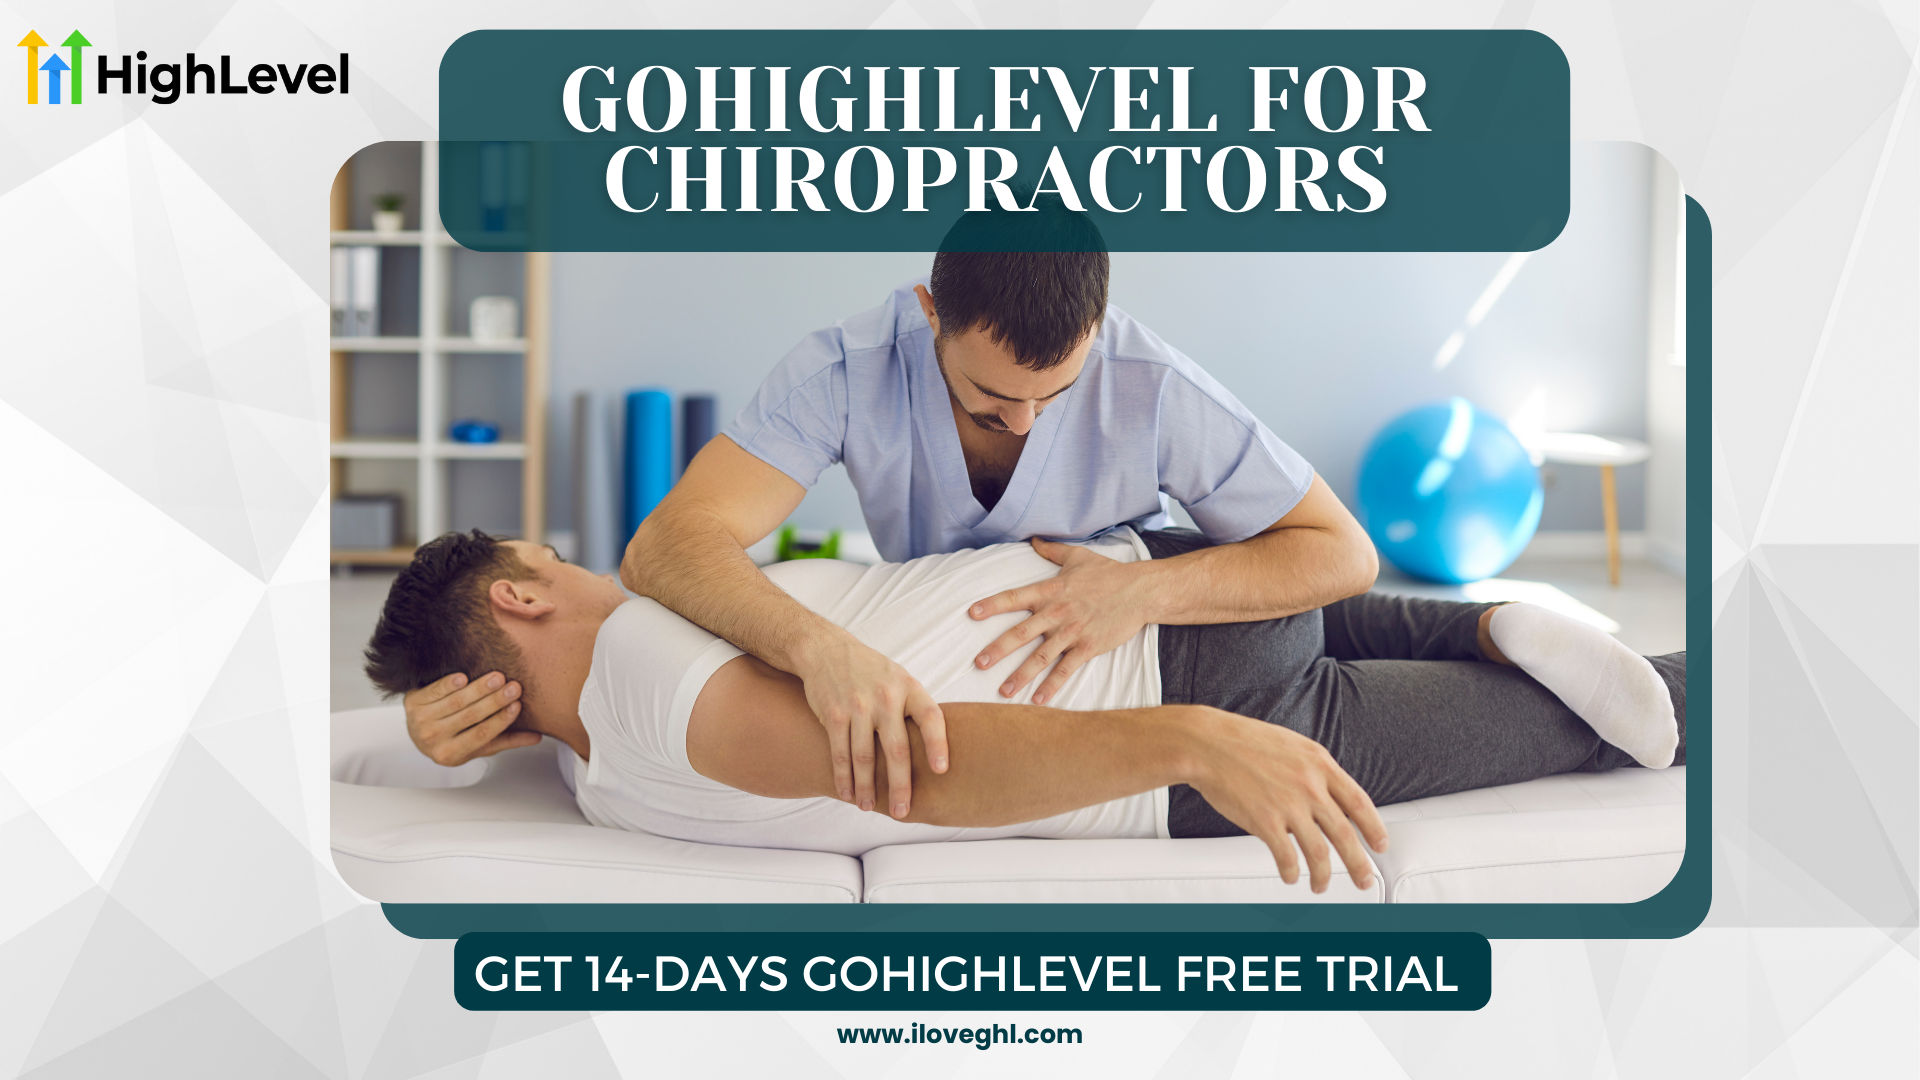 GoHighLevel for Chiropractor